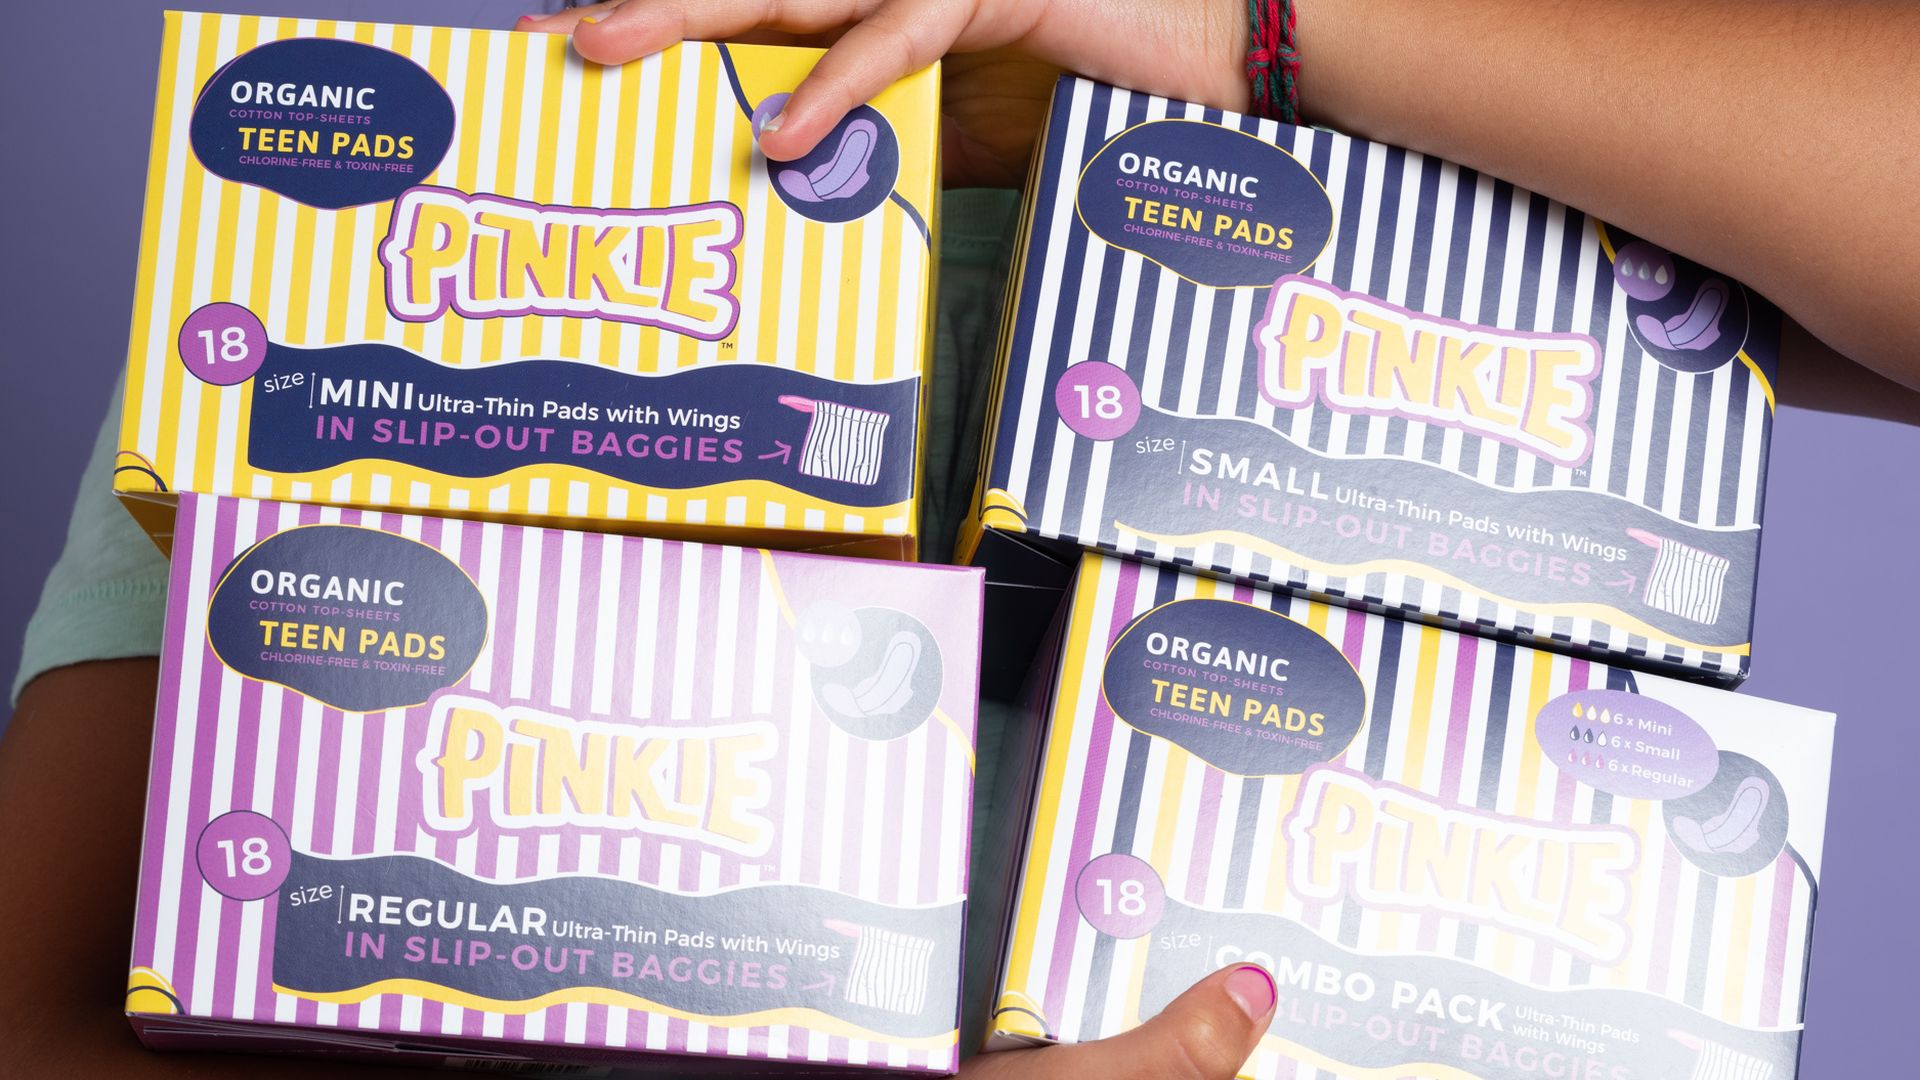 Pinkie, a maker of period pads for adolescents, raises $1M